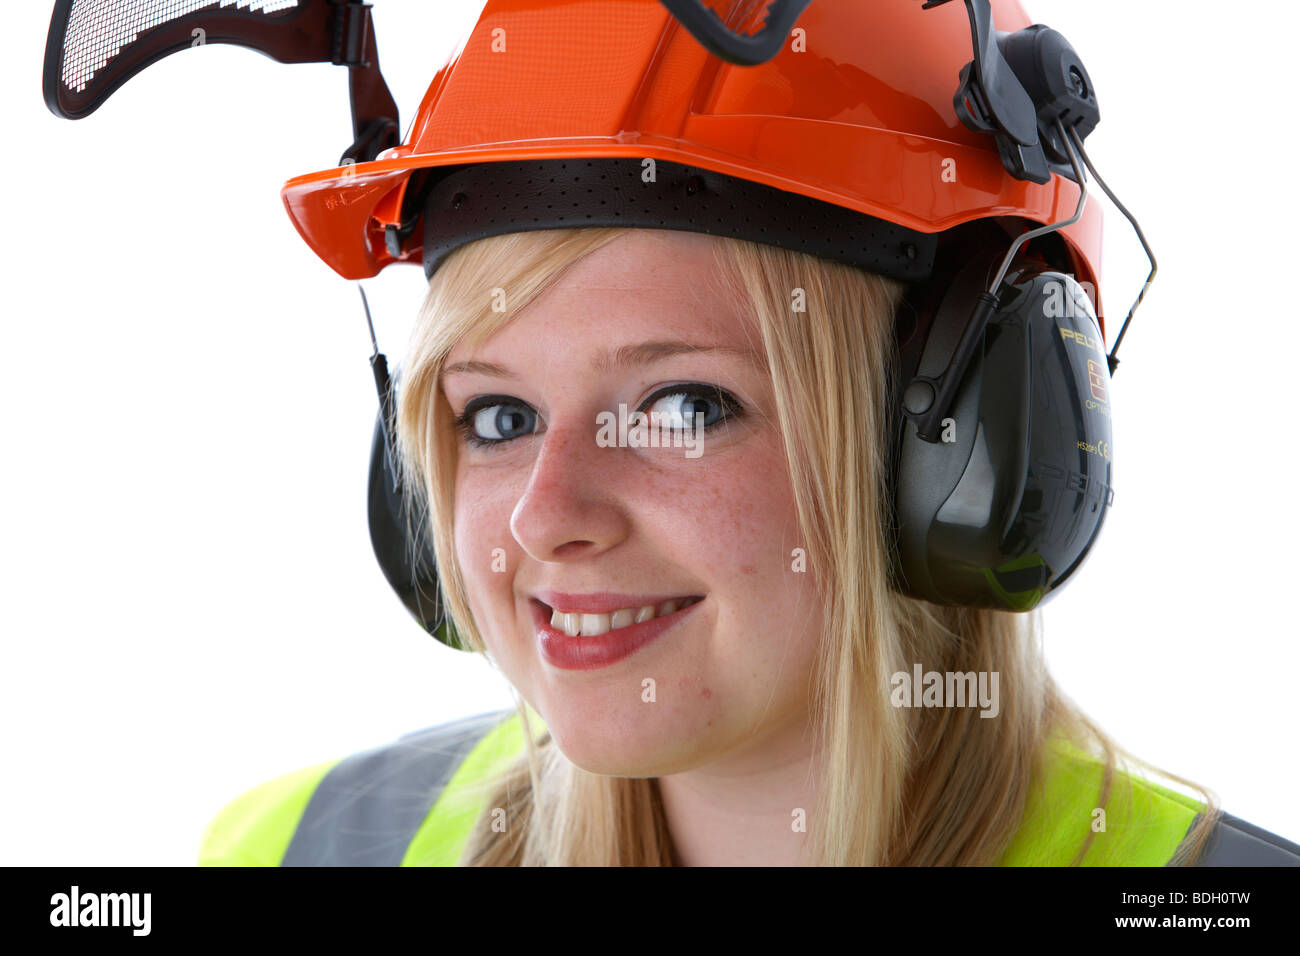 young 20 year old blonde woman smiling wearing orange hard hat ear protectors visor and high vis vest Stock Photo